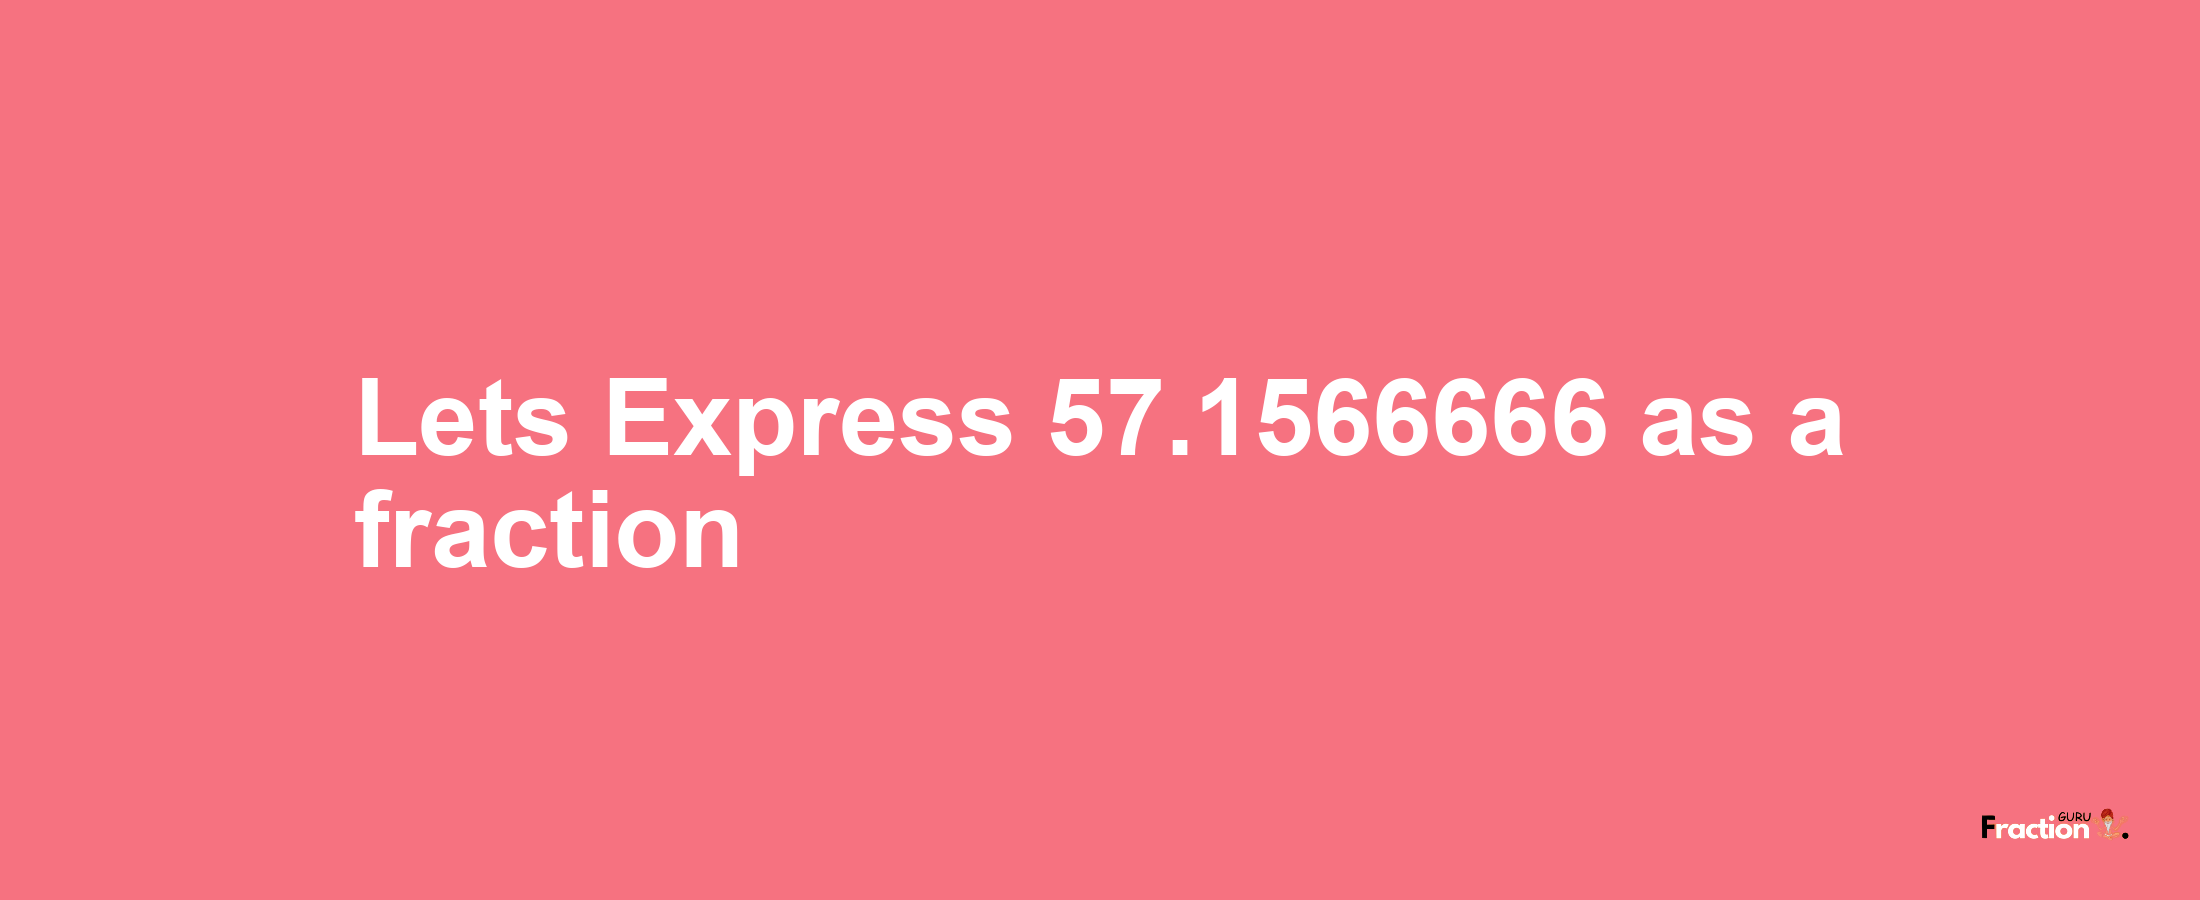 Lets Express 57.1566666 as afraction